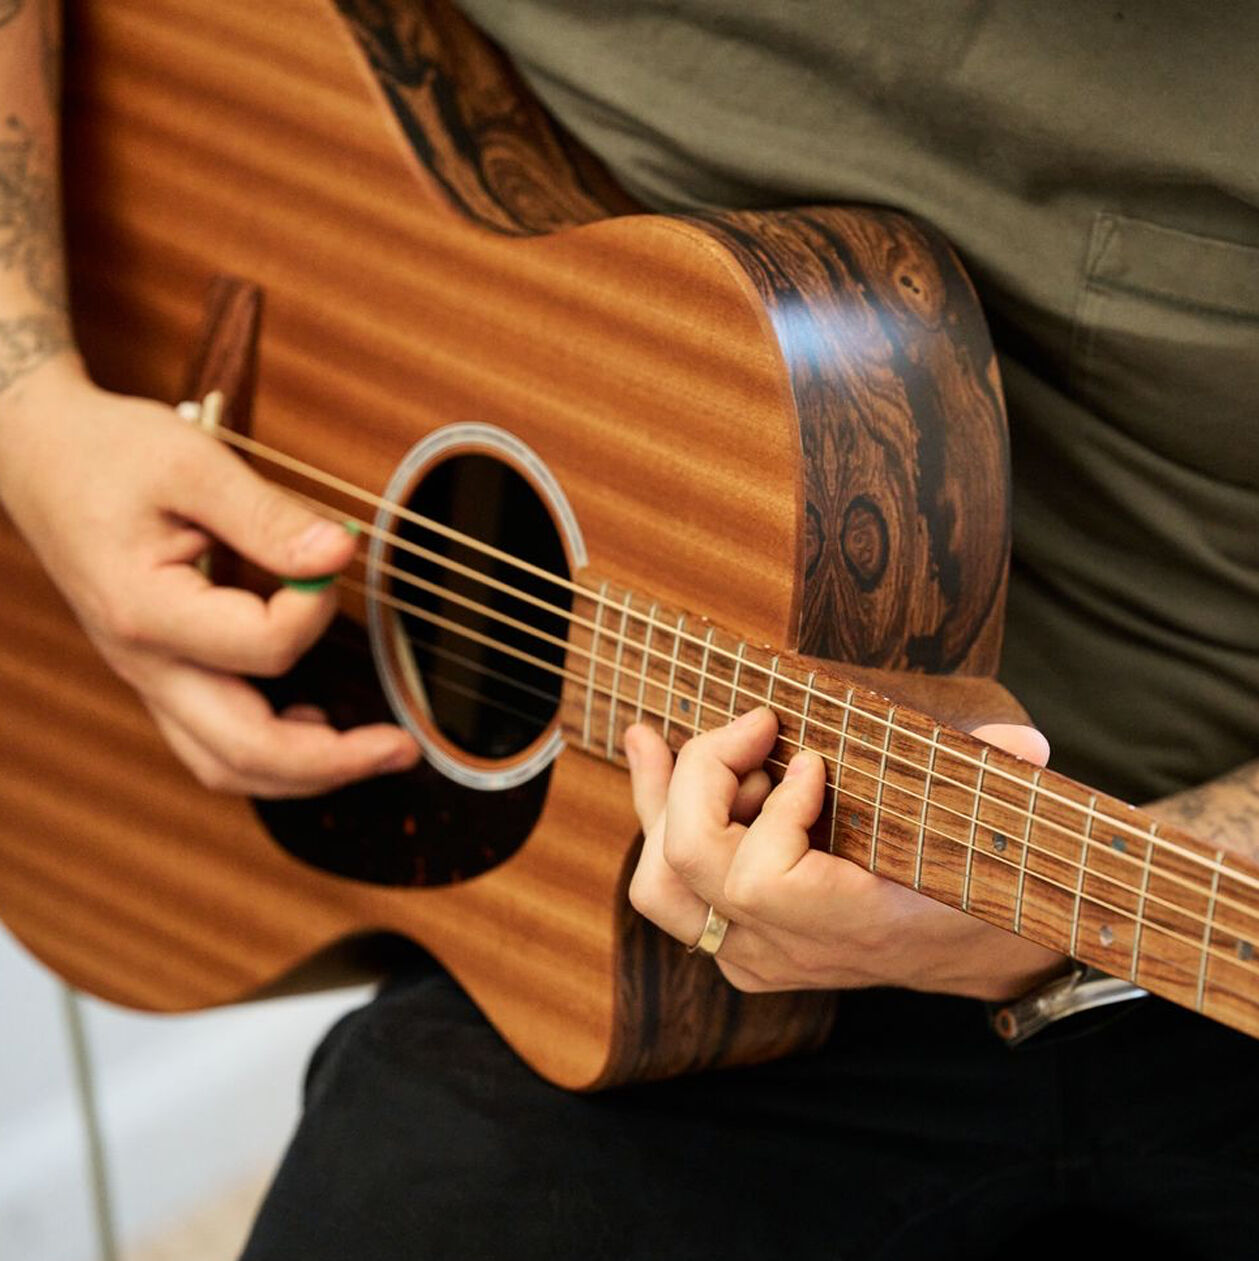 Closeup of a person playing an acoustic guitar